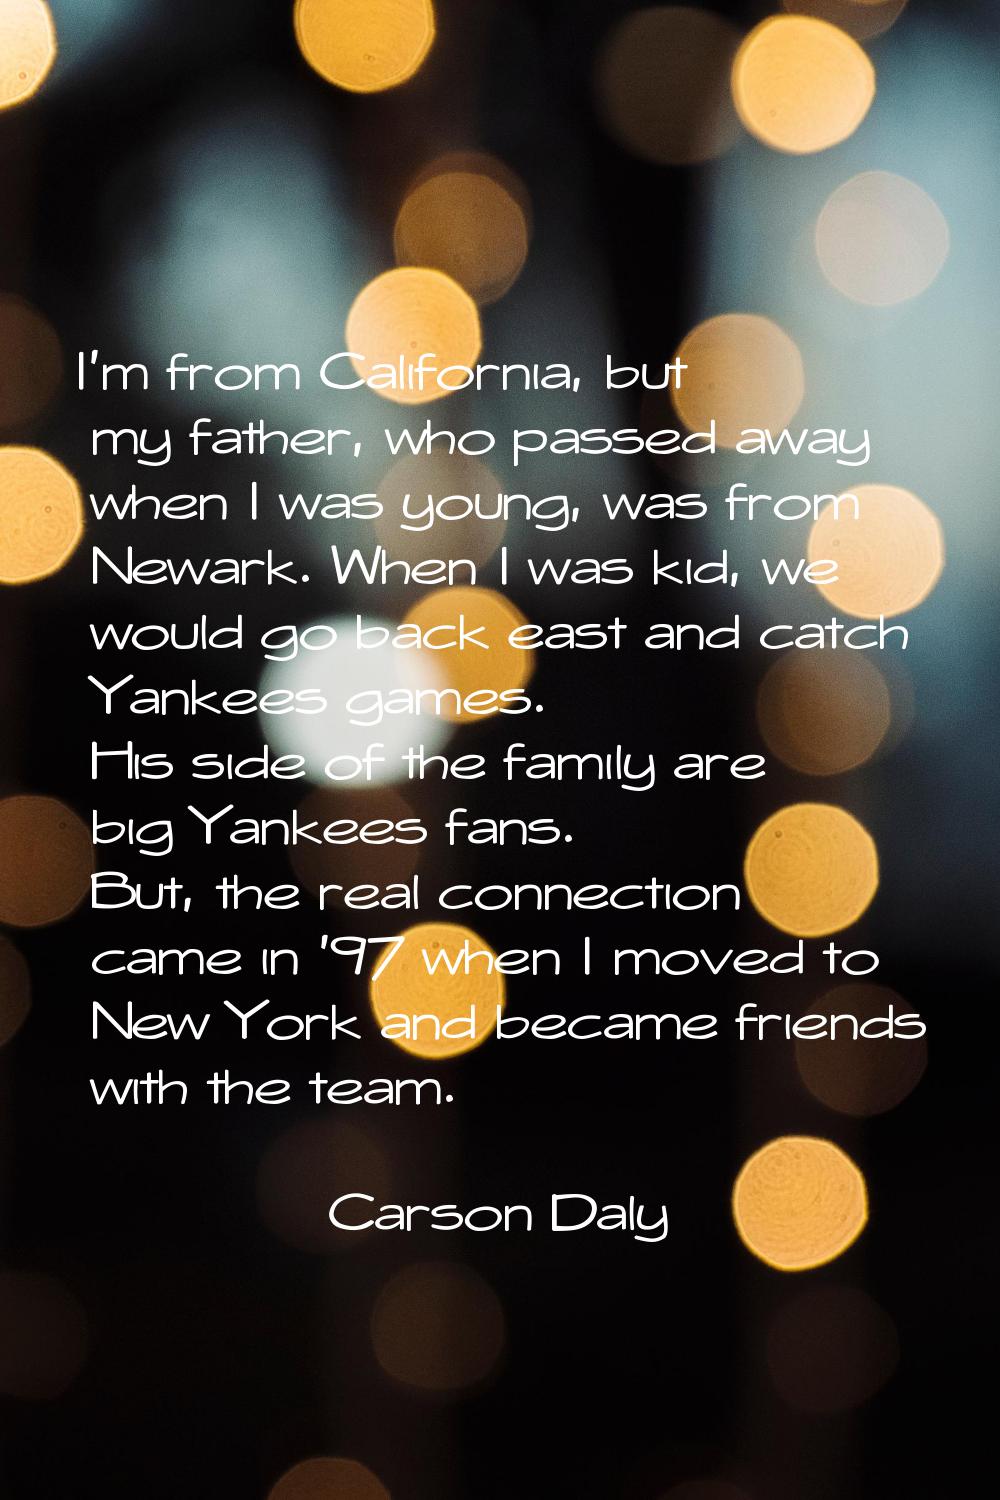 I'm from California, but my father, who passed away when I was young, was from Newark. When I was k